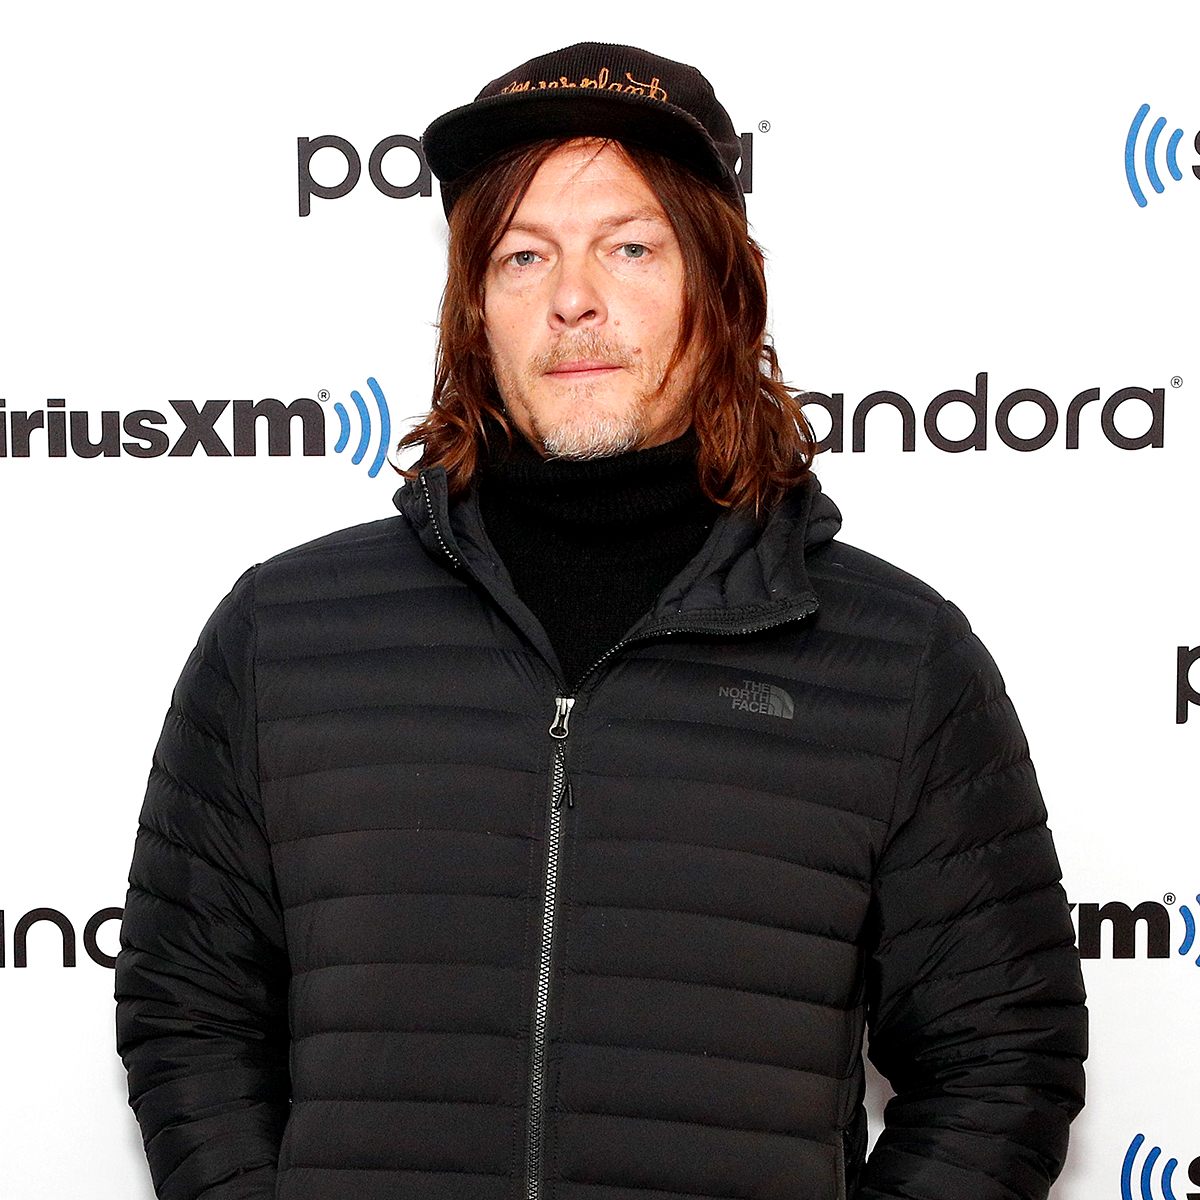 Norman Reedus Just Jared: Celebrity Gossip and Breaking Entertainment News, Page 6